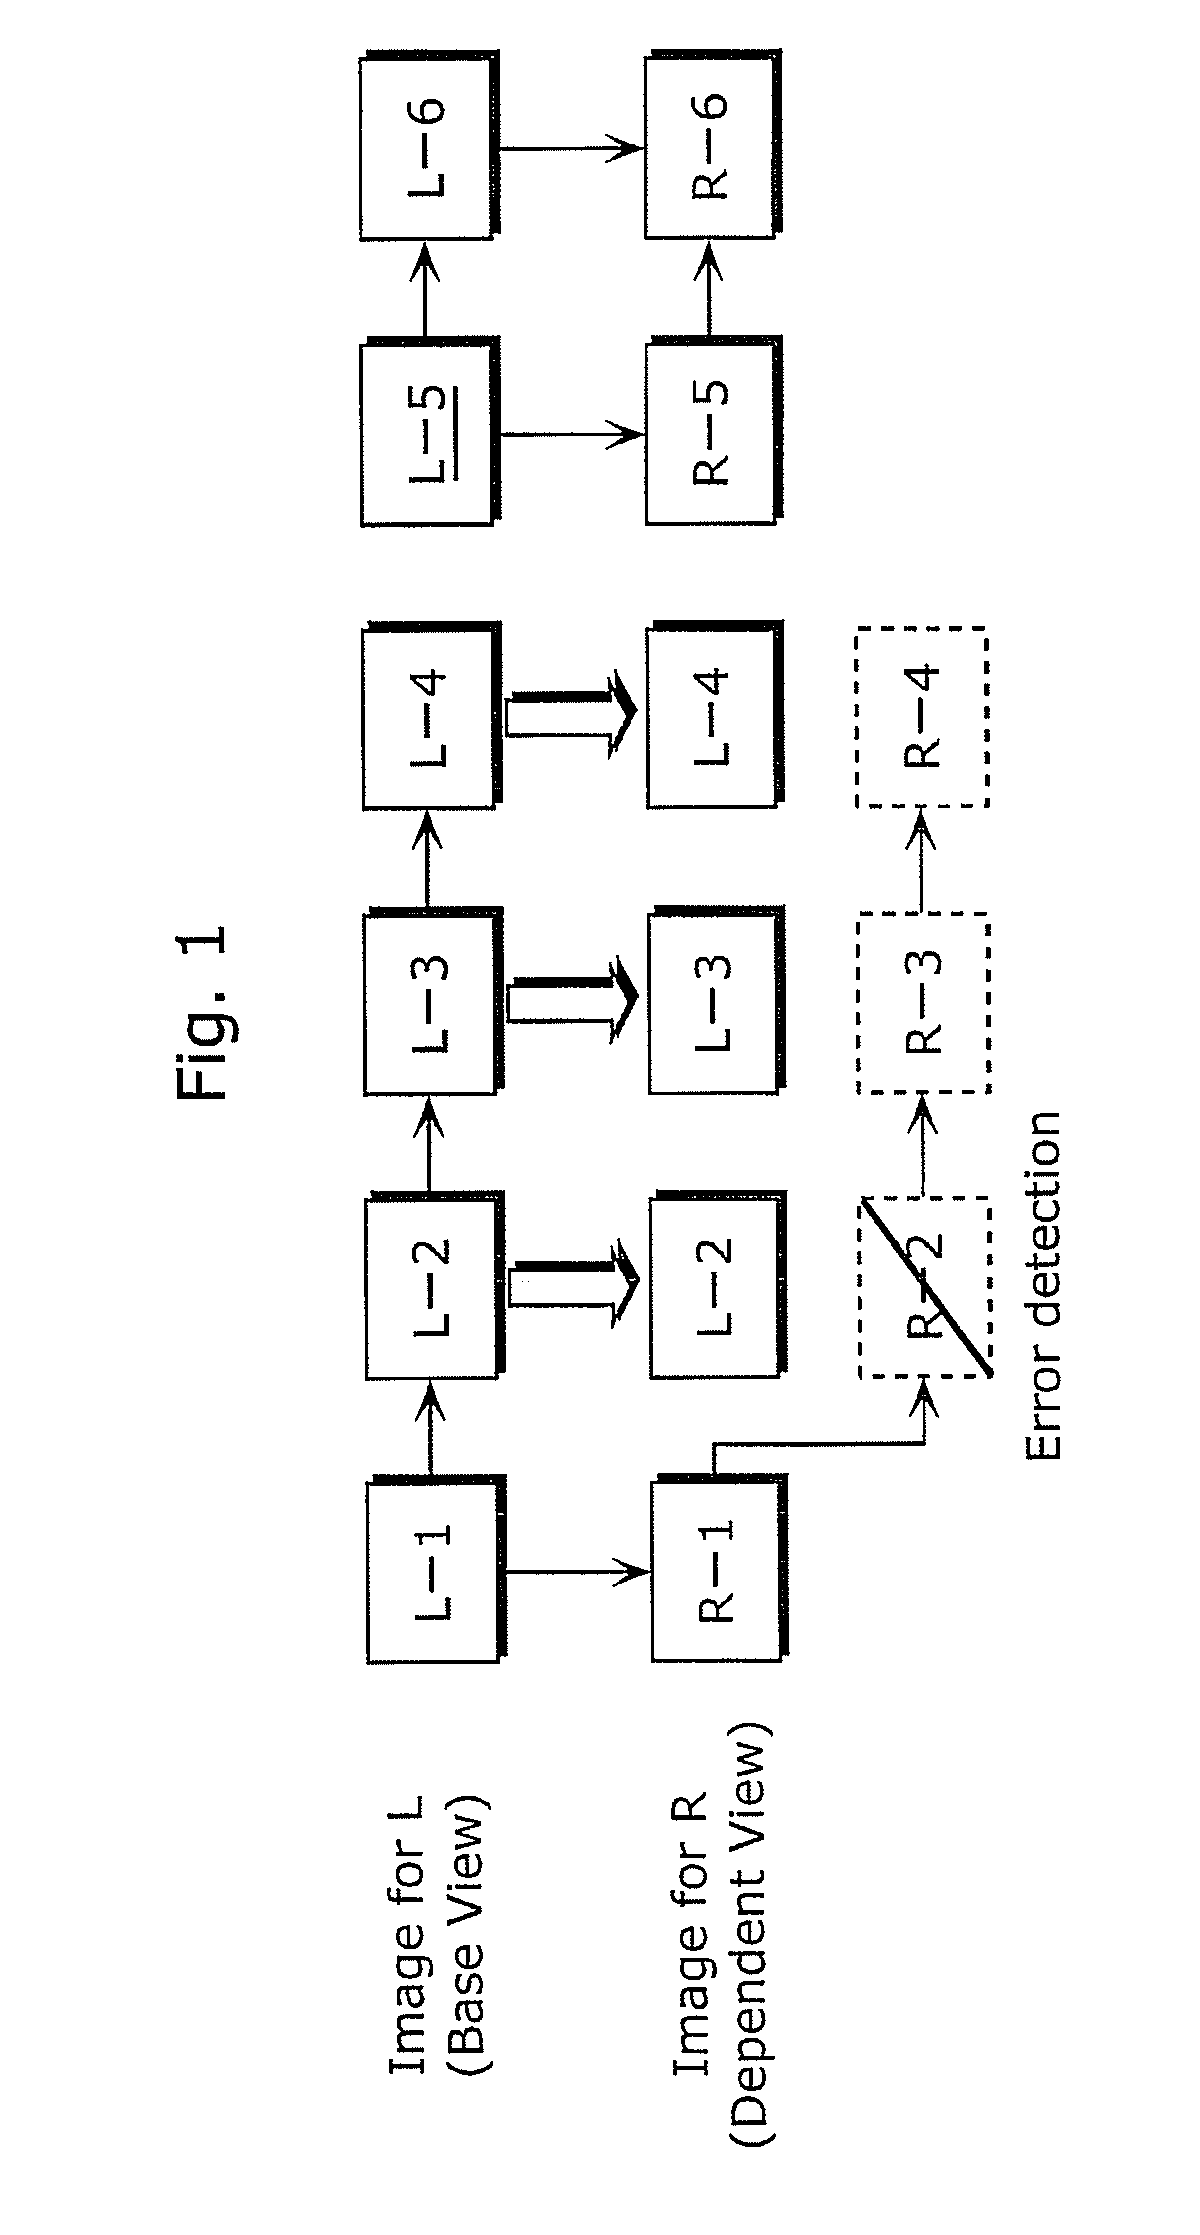 Multiview video decoding apparatus, multiview video decoding method, multiview video decoding program, and multview video decoding integrated circuit